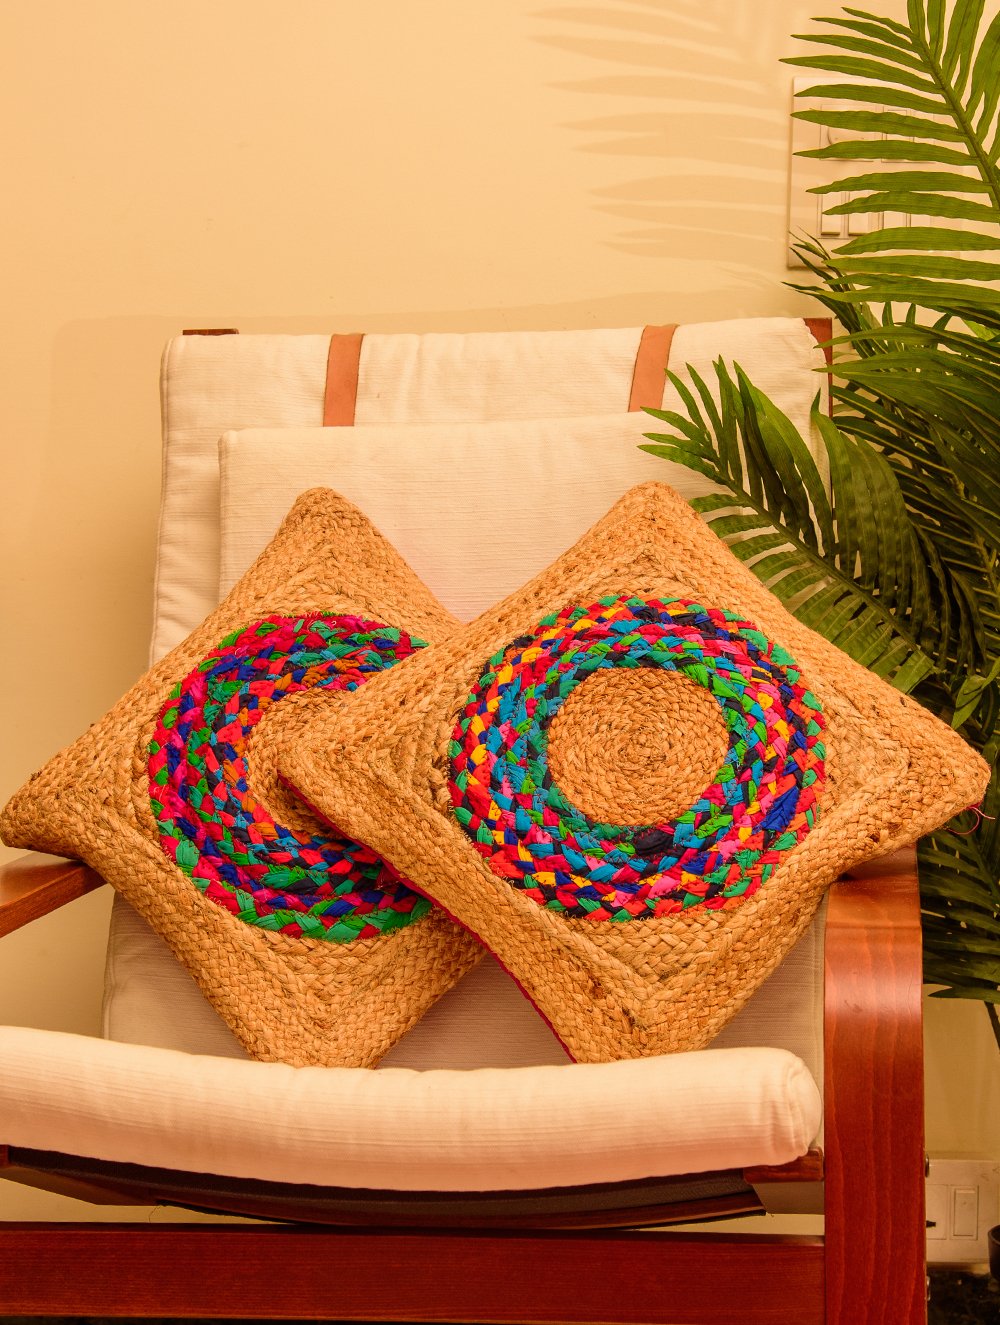 Load image into Gallery viewer, Jute Cushion Covers - Circle (Set of 2)